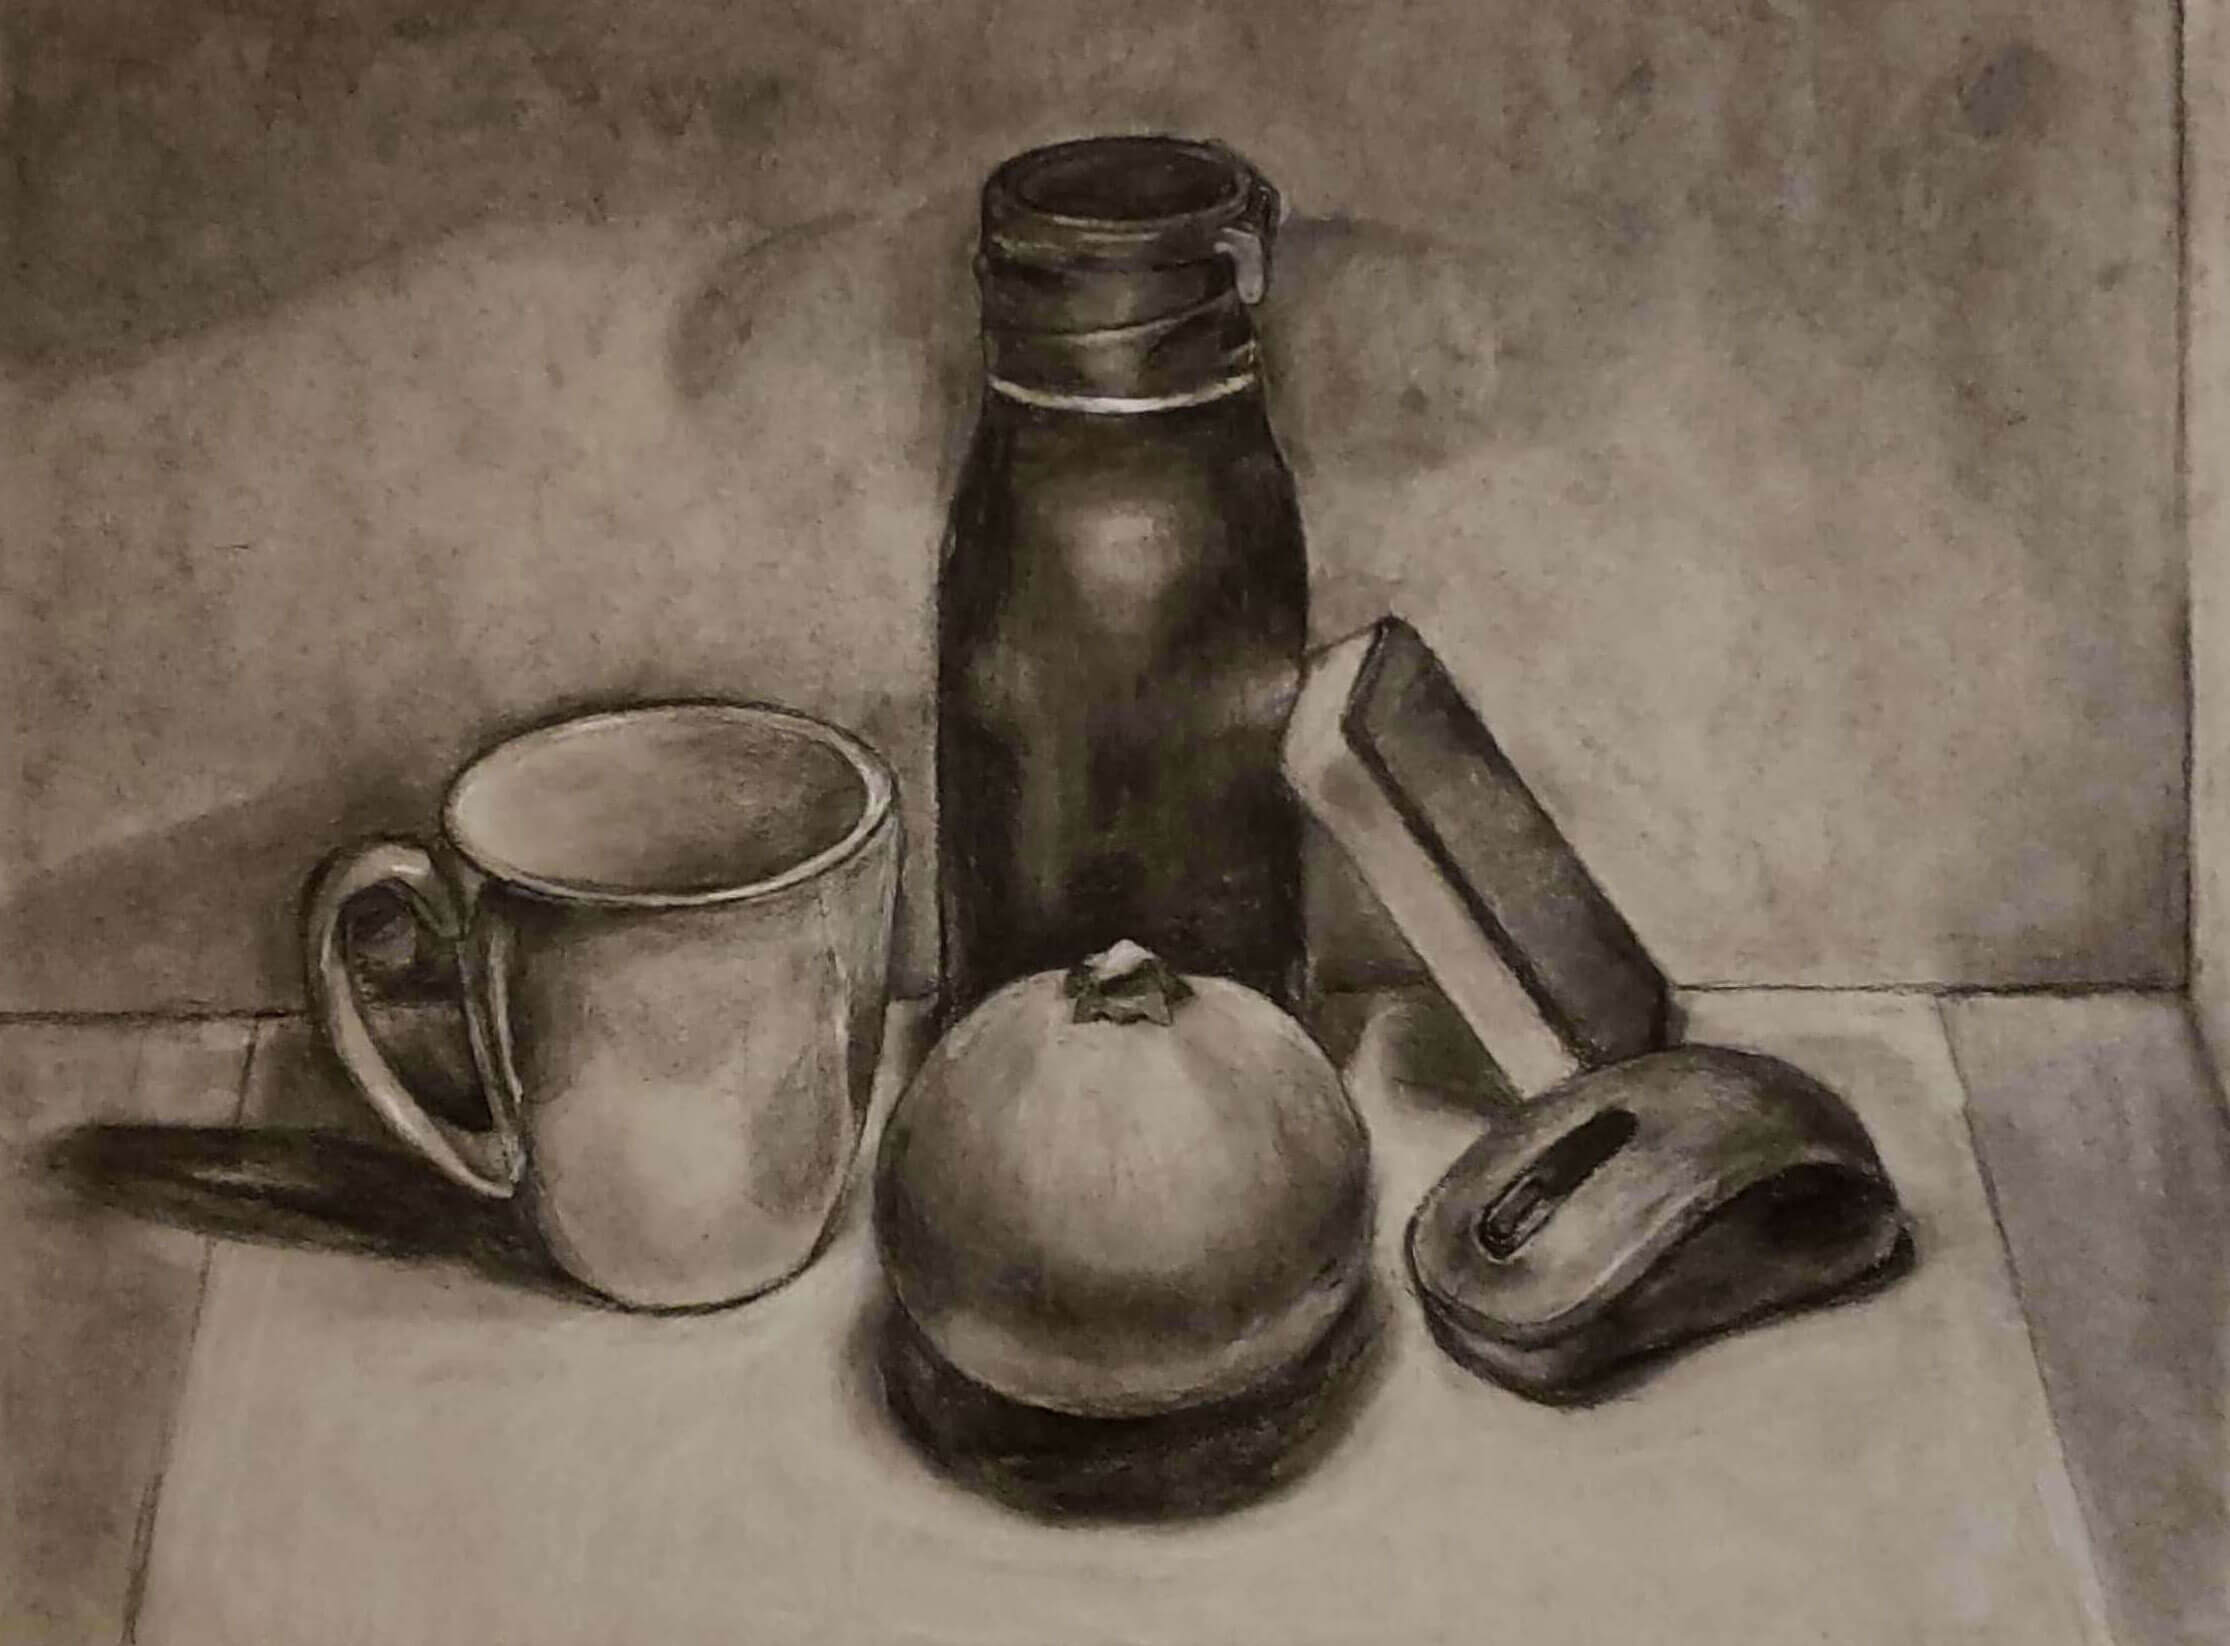 Sketch of a mug, thermos, computer mouse, small pumpkin, and eraser.